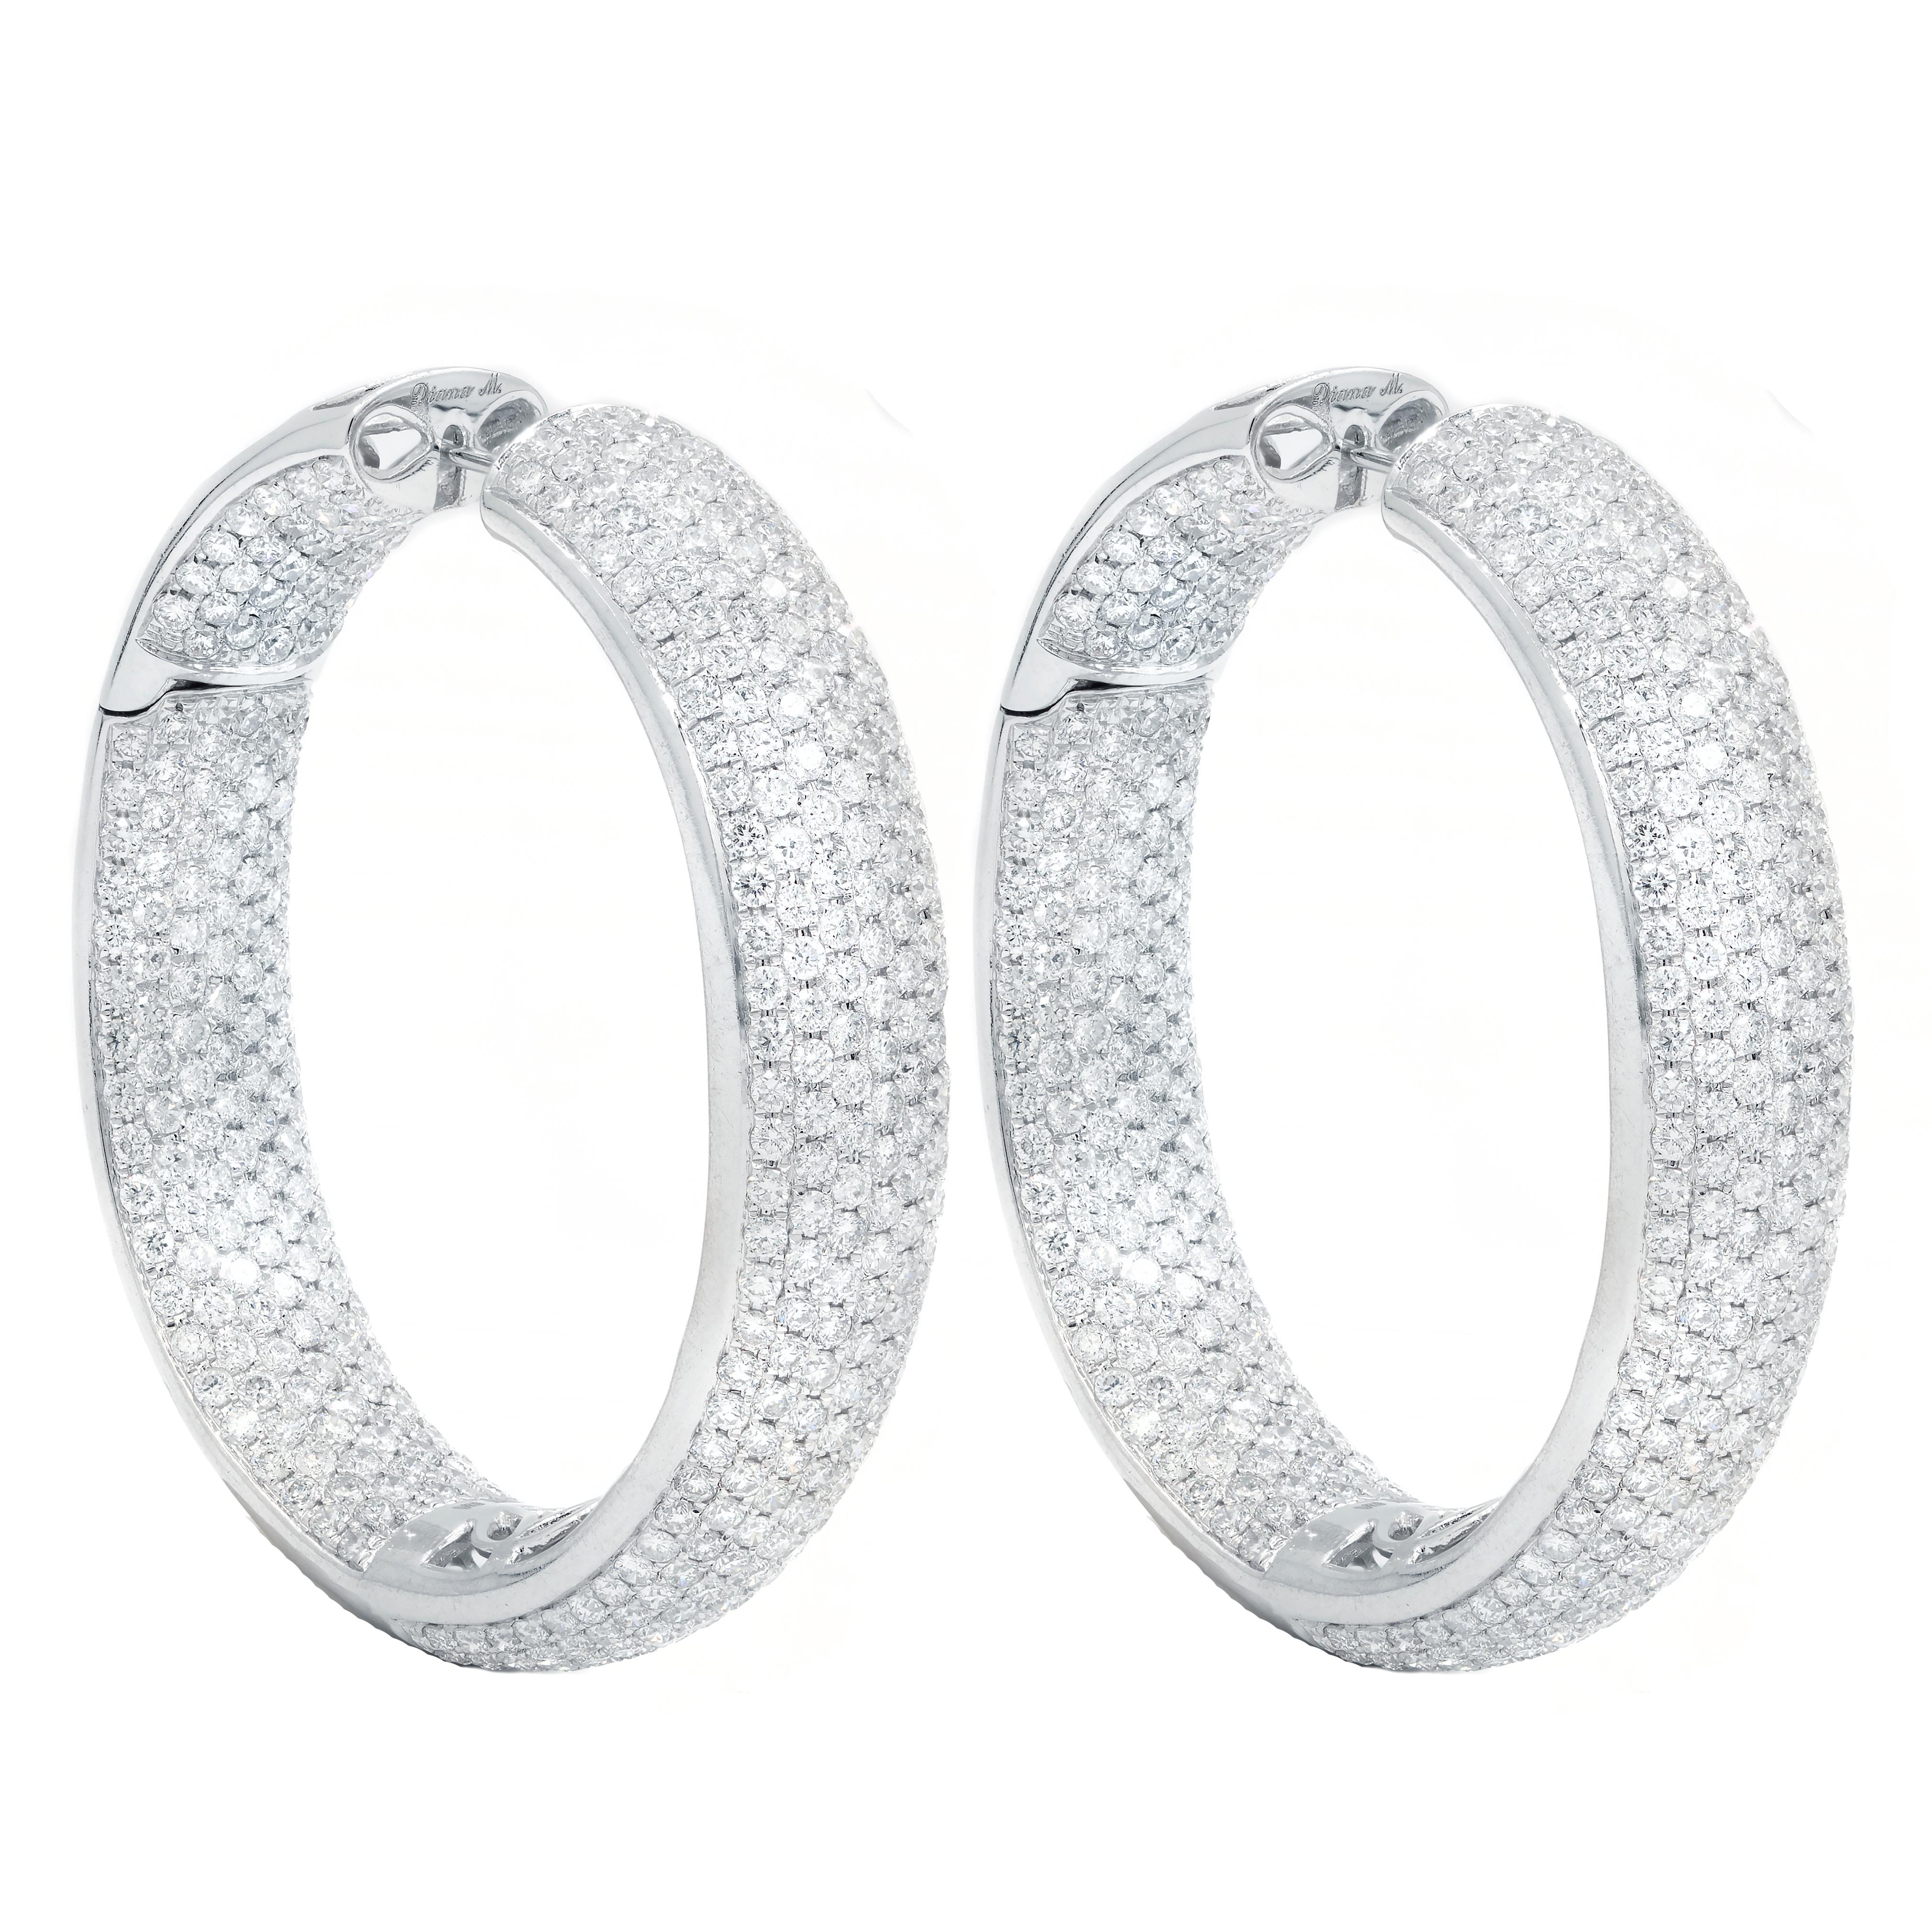 Diana M. 18 kt white gold inside-out hoop earrings adorned with 5 rows of 16.75  In New Condition For Sale In New York, NY